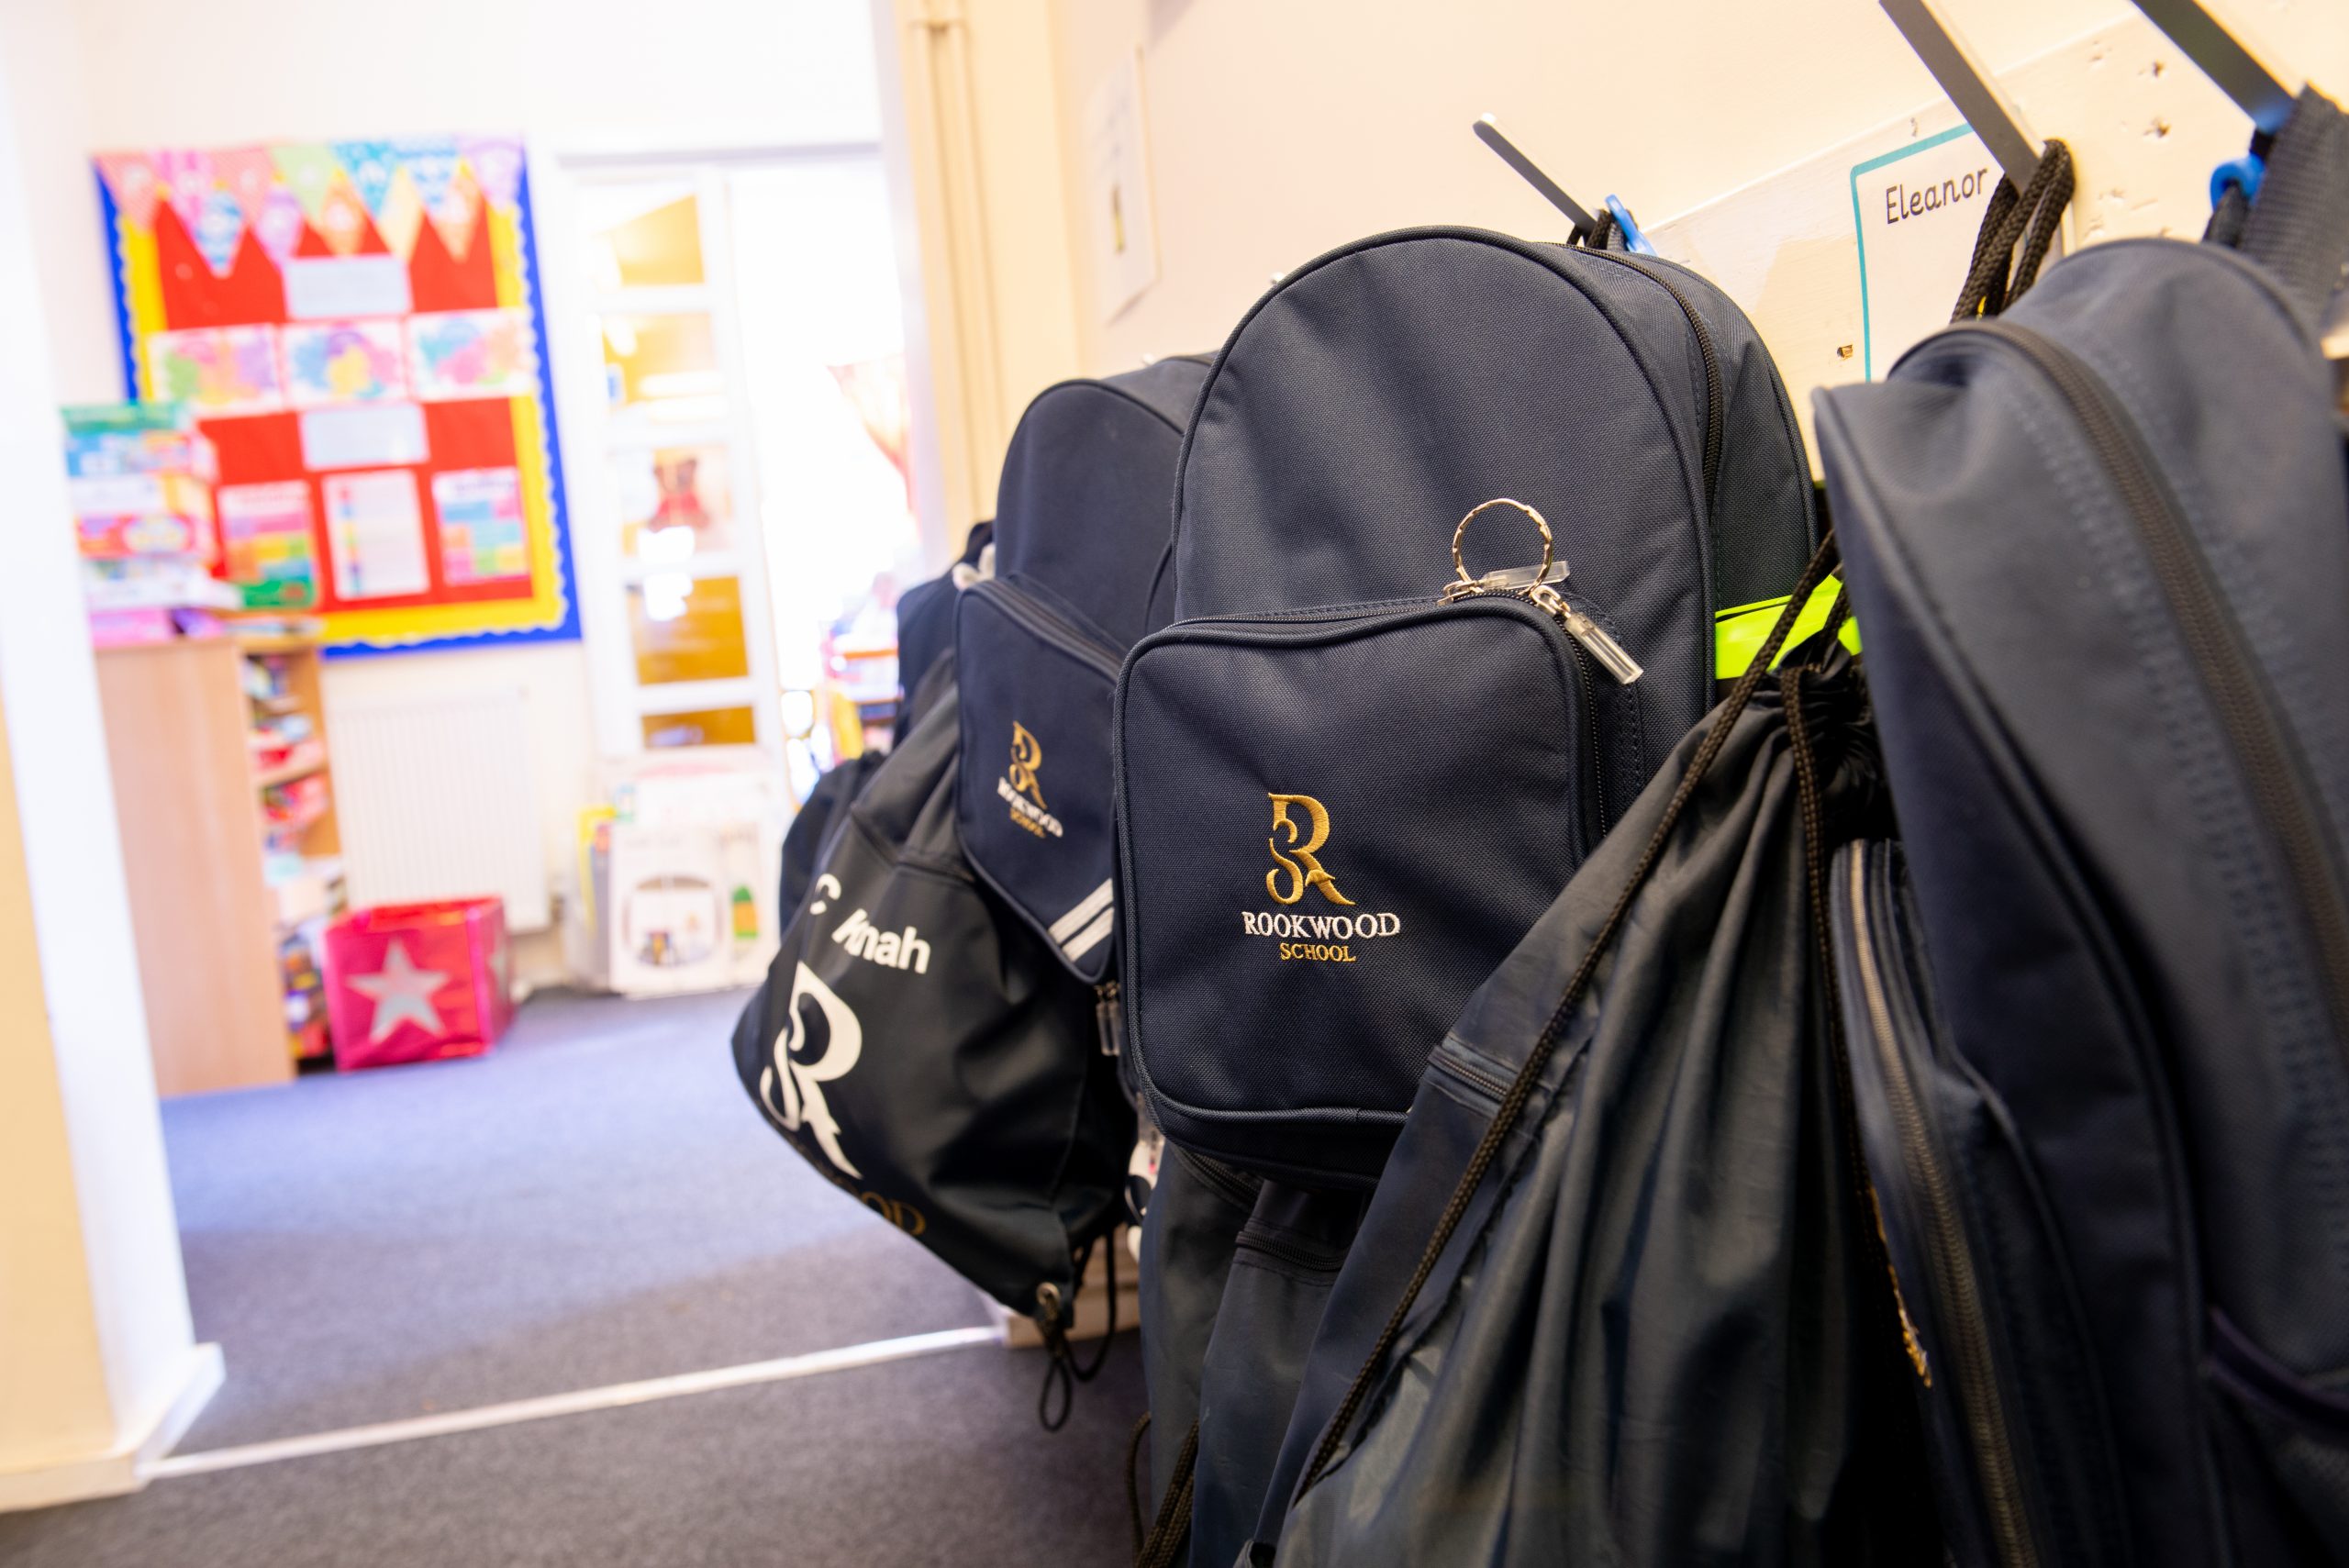 Rookwood School branded bags hung up on coat pegs